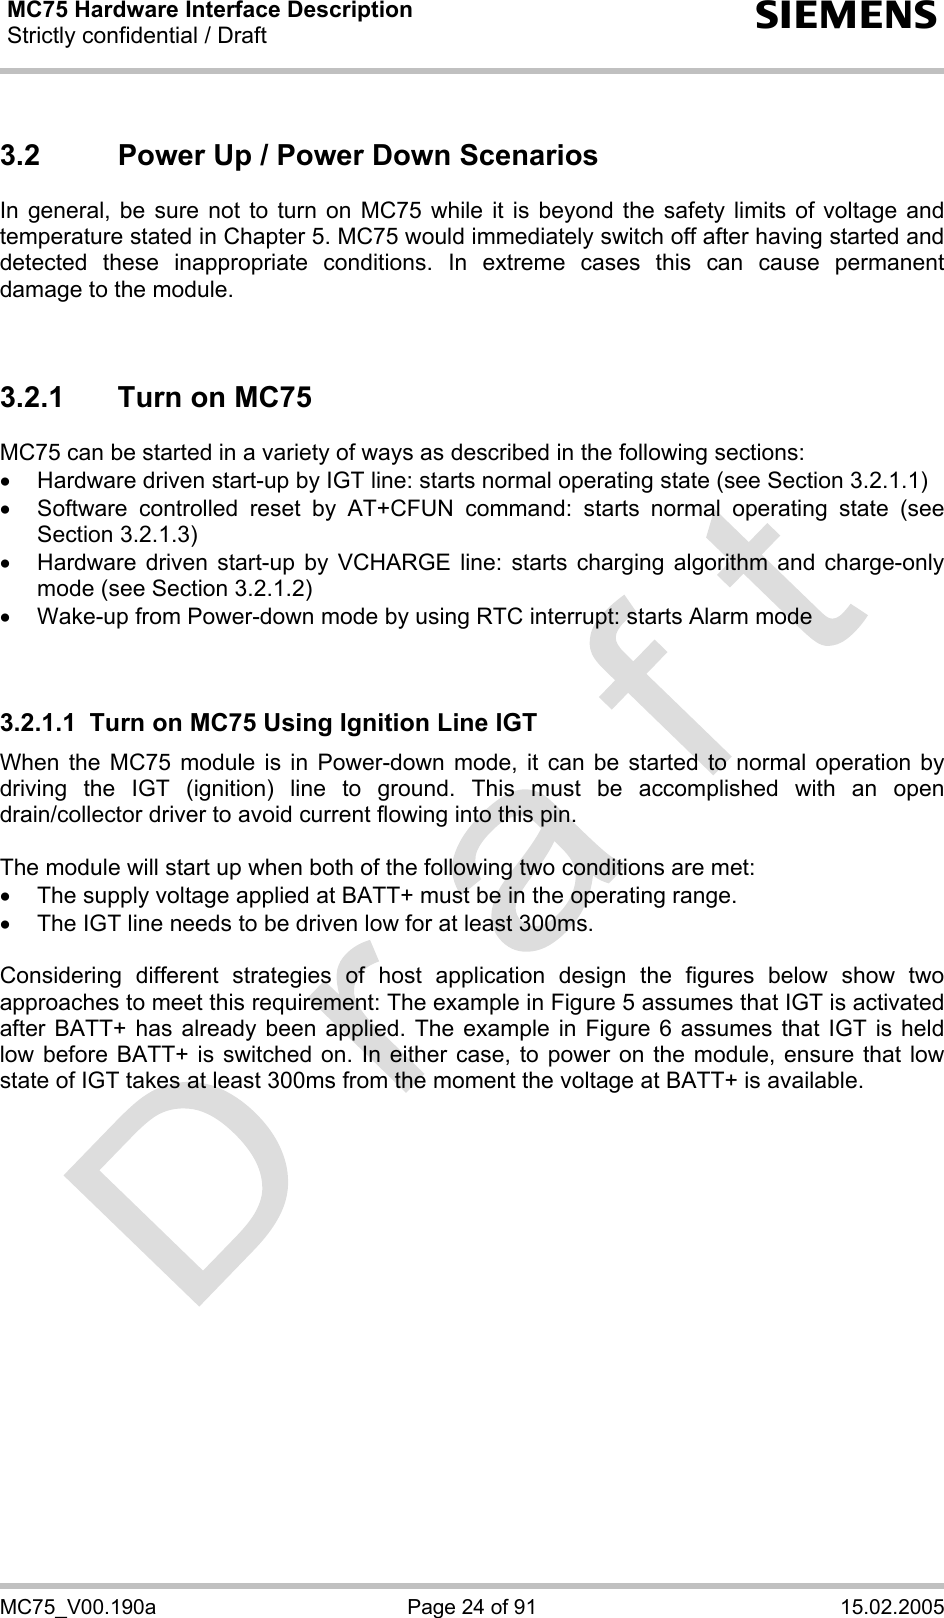 MC75 Hardware Interface Description Strictly confidential / Draft  s MC75_V00.190a  Page 24 of 91  15.02.2005 3.2  Power Up / Power Down Scenarios In general, be sure not to turn on MC75 while it is beyond the safety limits of voltage and temperature stated in Chapter 5. MC75 would immediately switch off after having started and detected these inappropriate conditions. In extreme cases this can cause permanent damage to the module.    3.2.1  Turn on MC75 MC75 can be started in a variety of ways as described in the following sections: •  Hardware driven start-up by IGT line: starts normal operating state (see Section 3.2.1.1) •  Software controlled reset by AT+CFUN command: starts normal operating state (see Section 3.2.1.3) •  Hardware driven start-up by VCHARGE line: starts charging algorithm and charge-only mode (see Section 3.2.1.2) •  Wake-up from Power-down mode by using RTC interrupt: starts Alarm mode   3.2.1.1  Turn on MC75 Using Ignition Line IGT When the MC75 module is in Power-down mode, it can be started to normal operation by driving the IGT (ignition) line to ground. This must be accomplished with an open drain/collector driver to avoid current flowing into this pin.   The module will start up when both of the following two conditions are met:  •  The supply voltage applied at BATT+ must be in the operating range.  •  The IGT line needs to be driven low for at least 300ms.  Considering different strategies of host application design the figures below show two approaches to meet this requirement: The example in Figure 5 assumes that IGT is activated after BATT+ has already been applied. The example in Figure 6 assumes that IGT is held low before BATT+ is switched on. In either case, to power on the module, ensure that low state of IGT takes at least 300ms from the moment the voltage at BATT+ is available.  